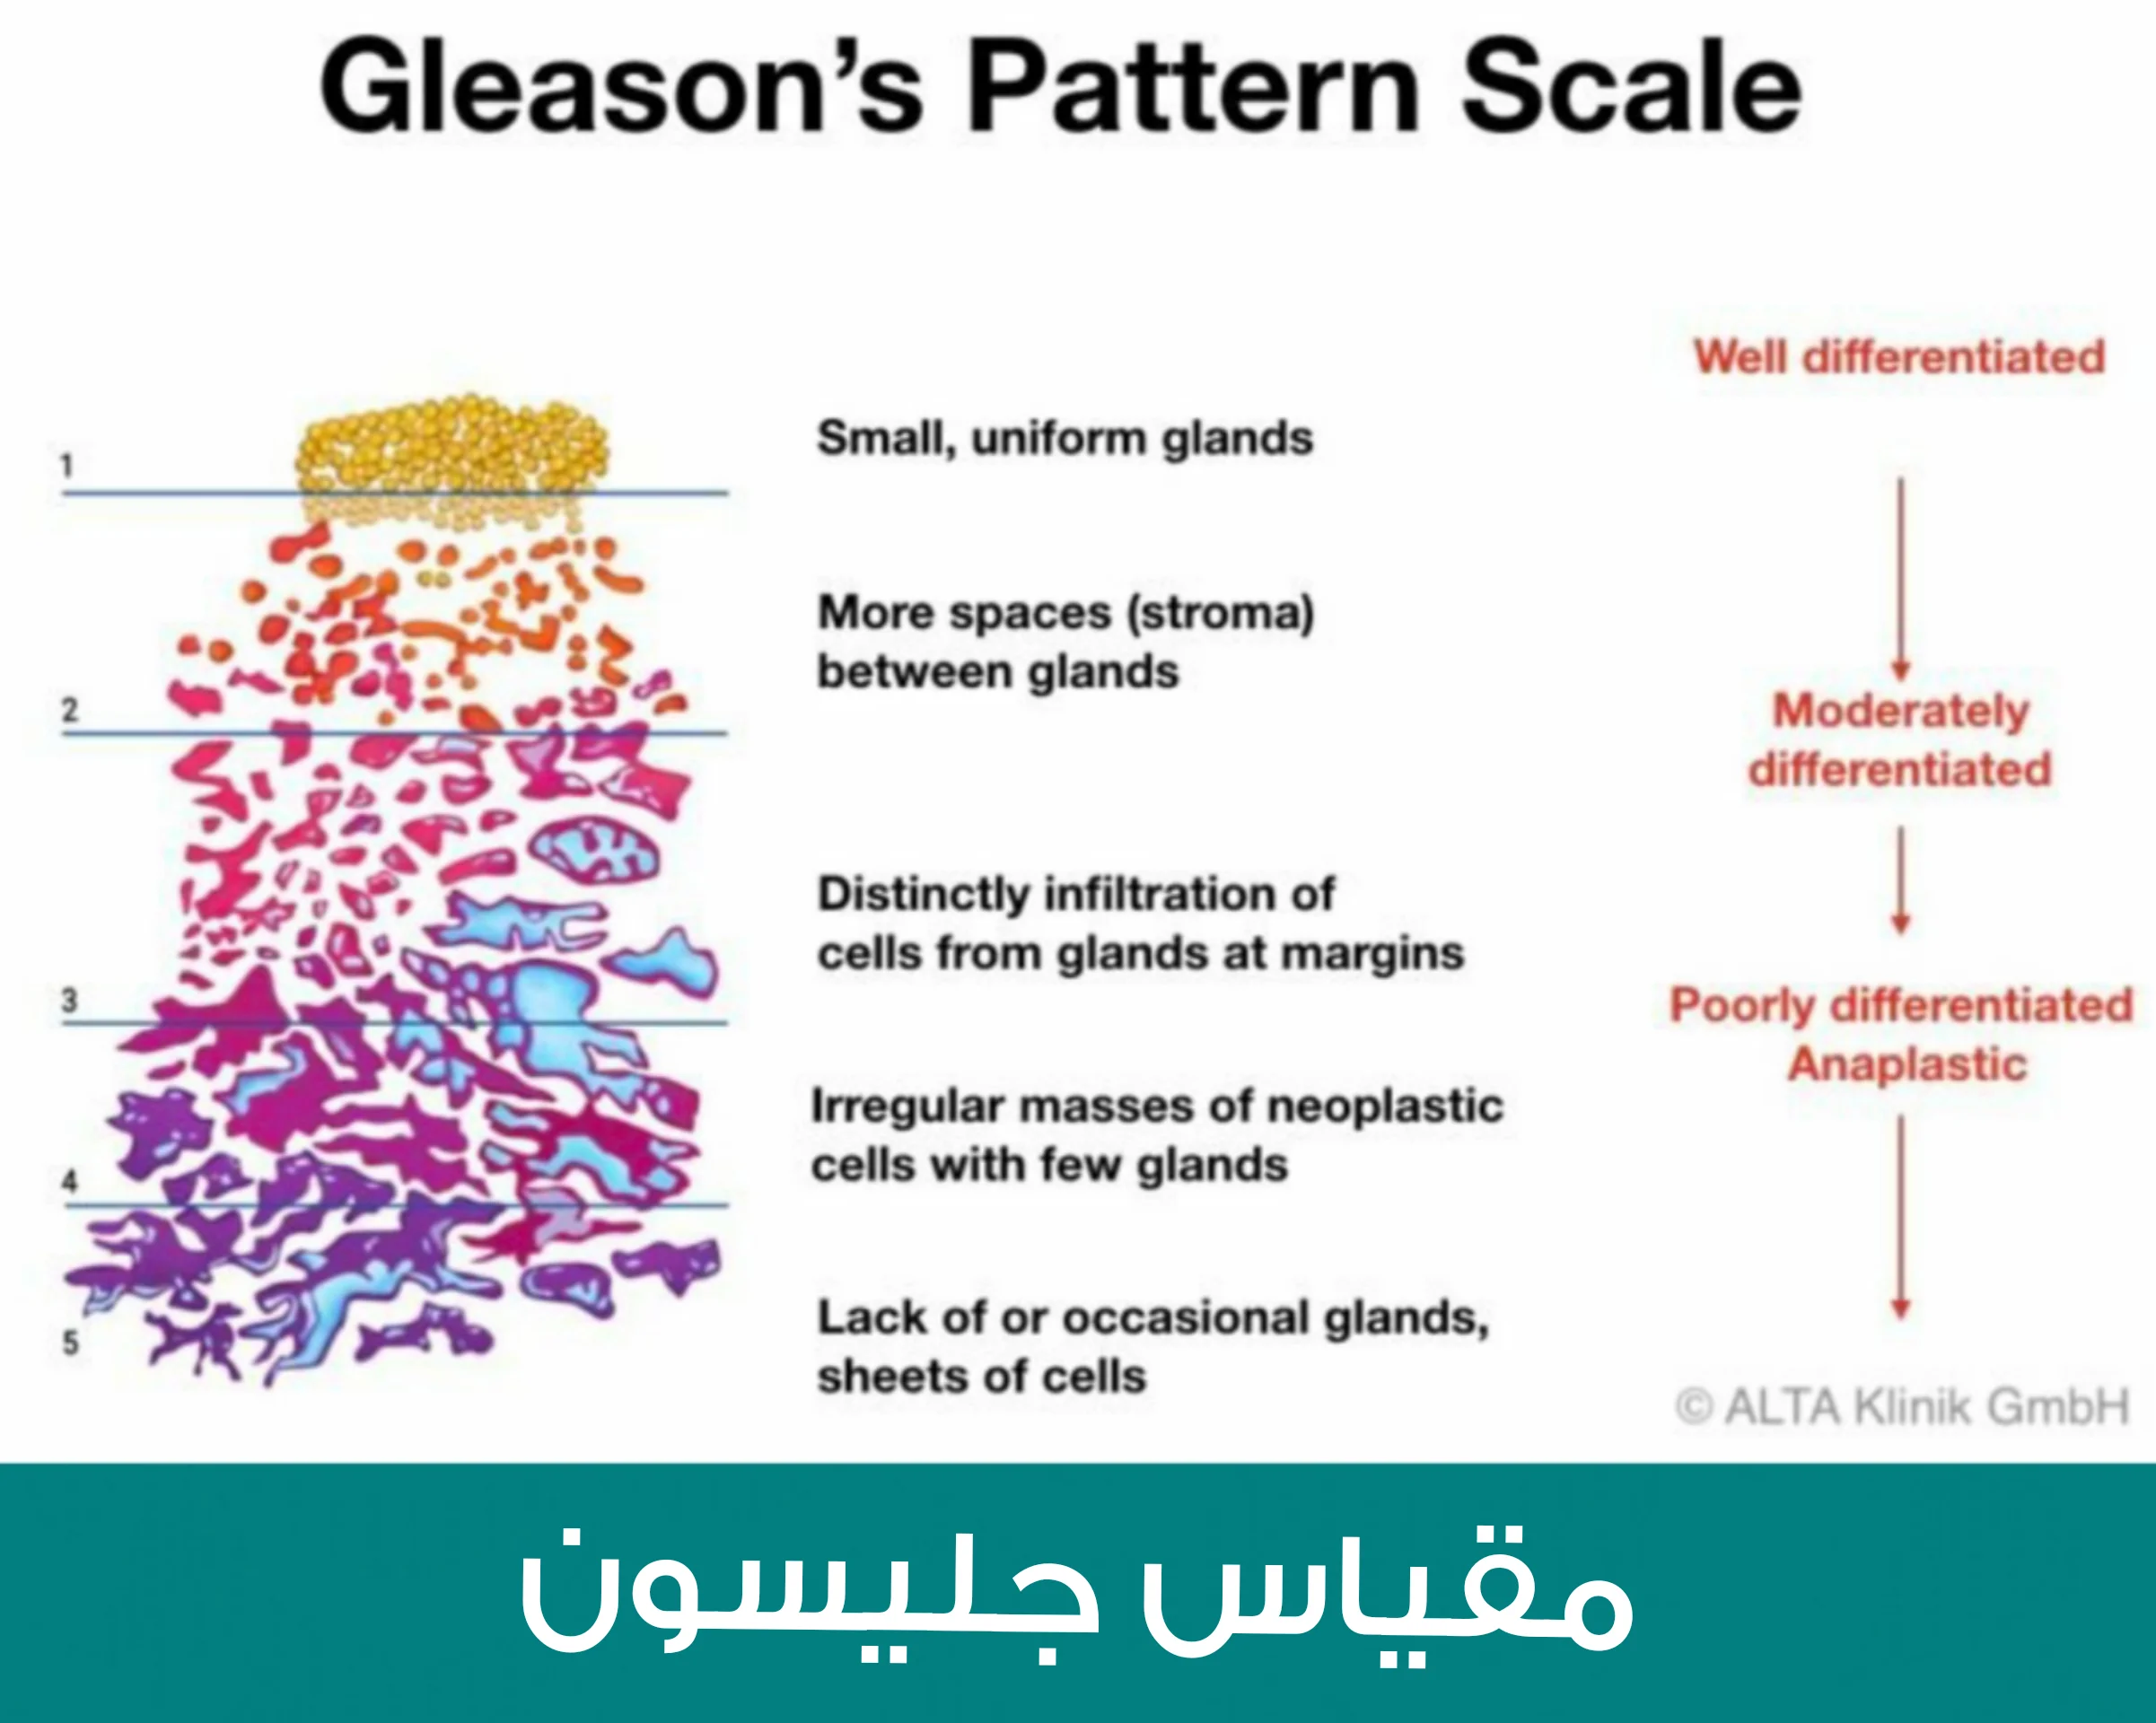 Gleason staging scale for prostate cancer